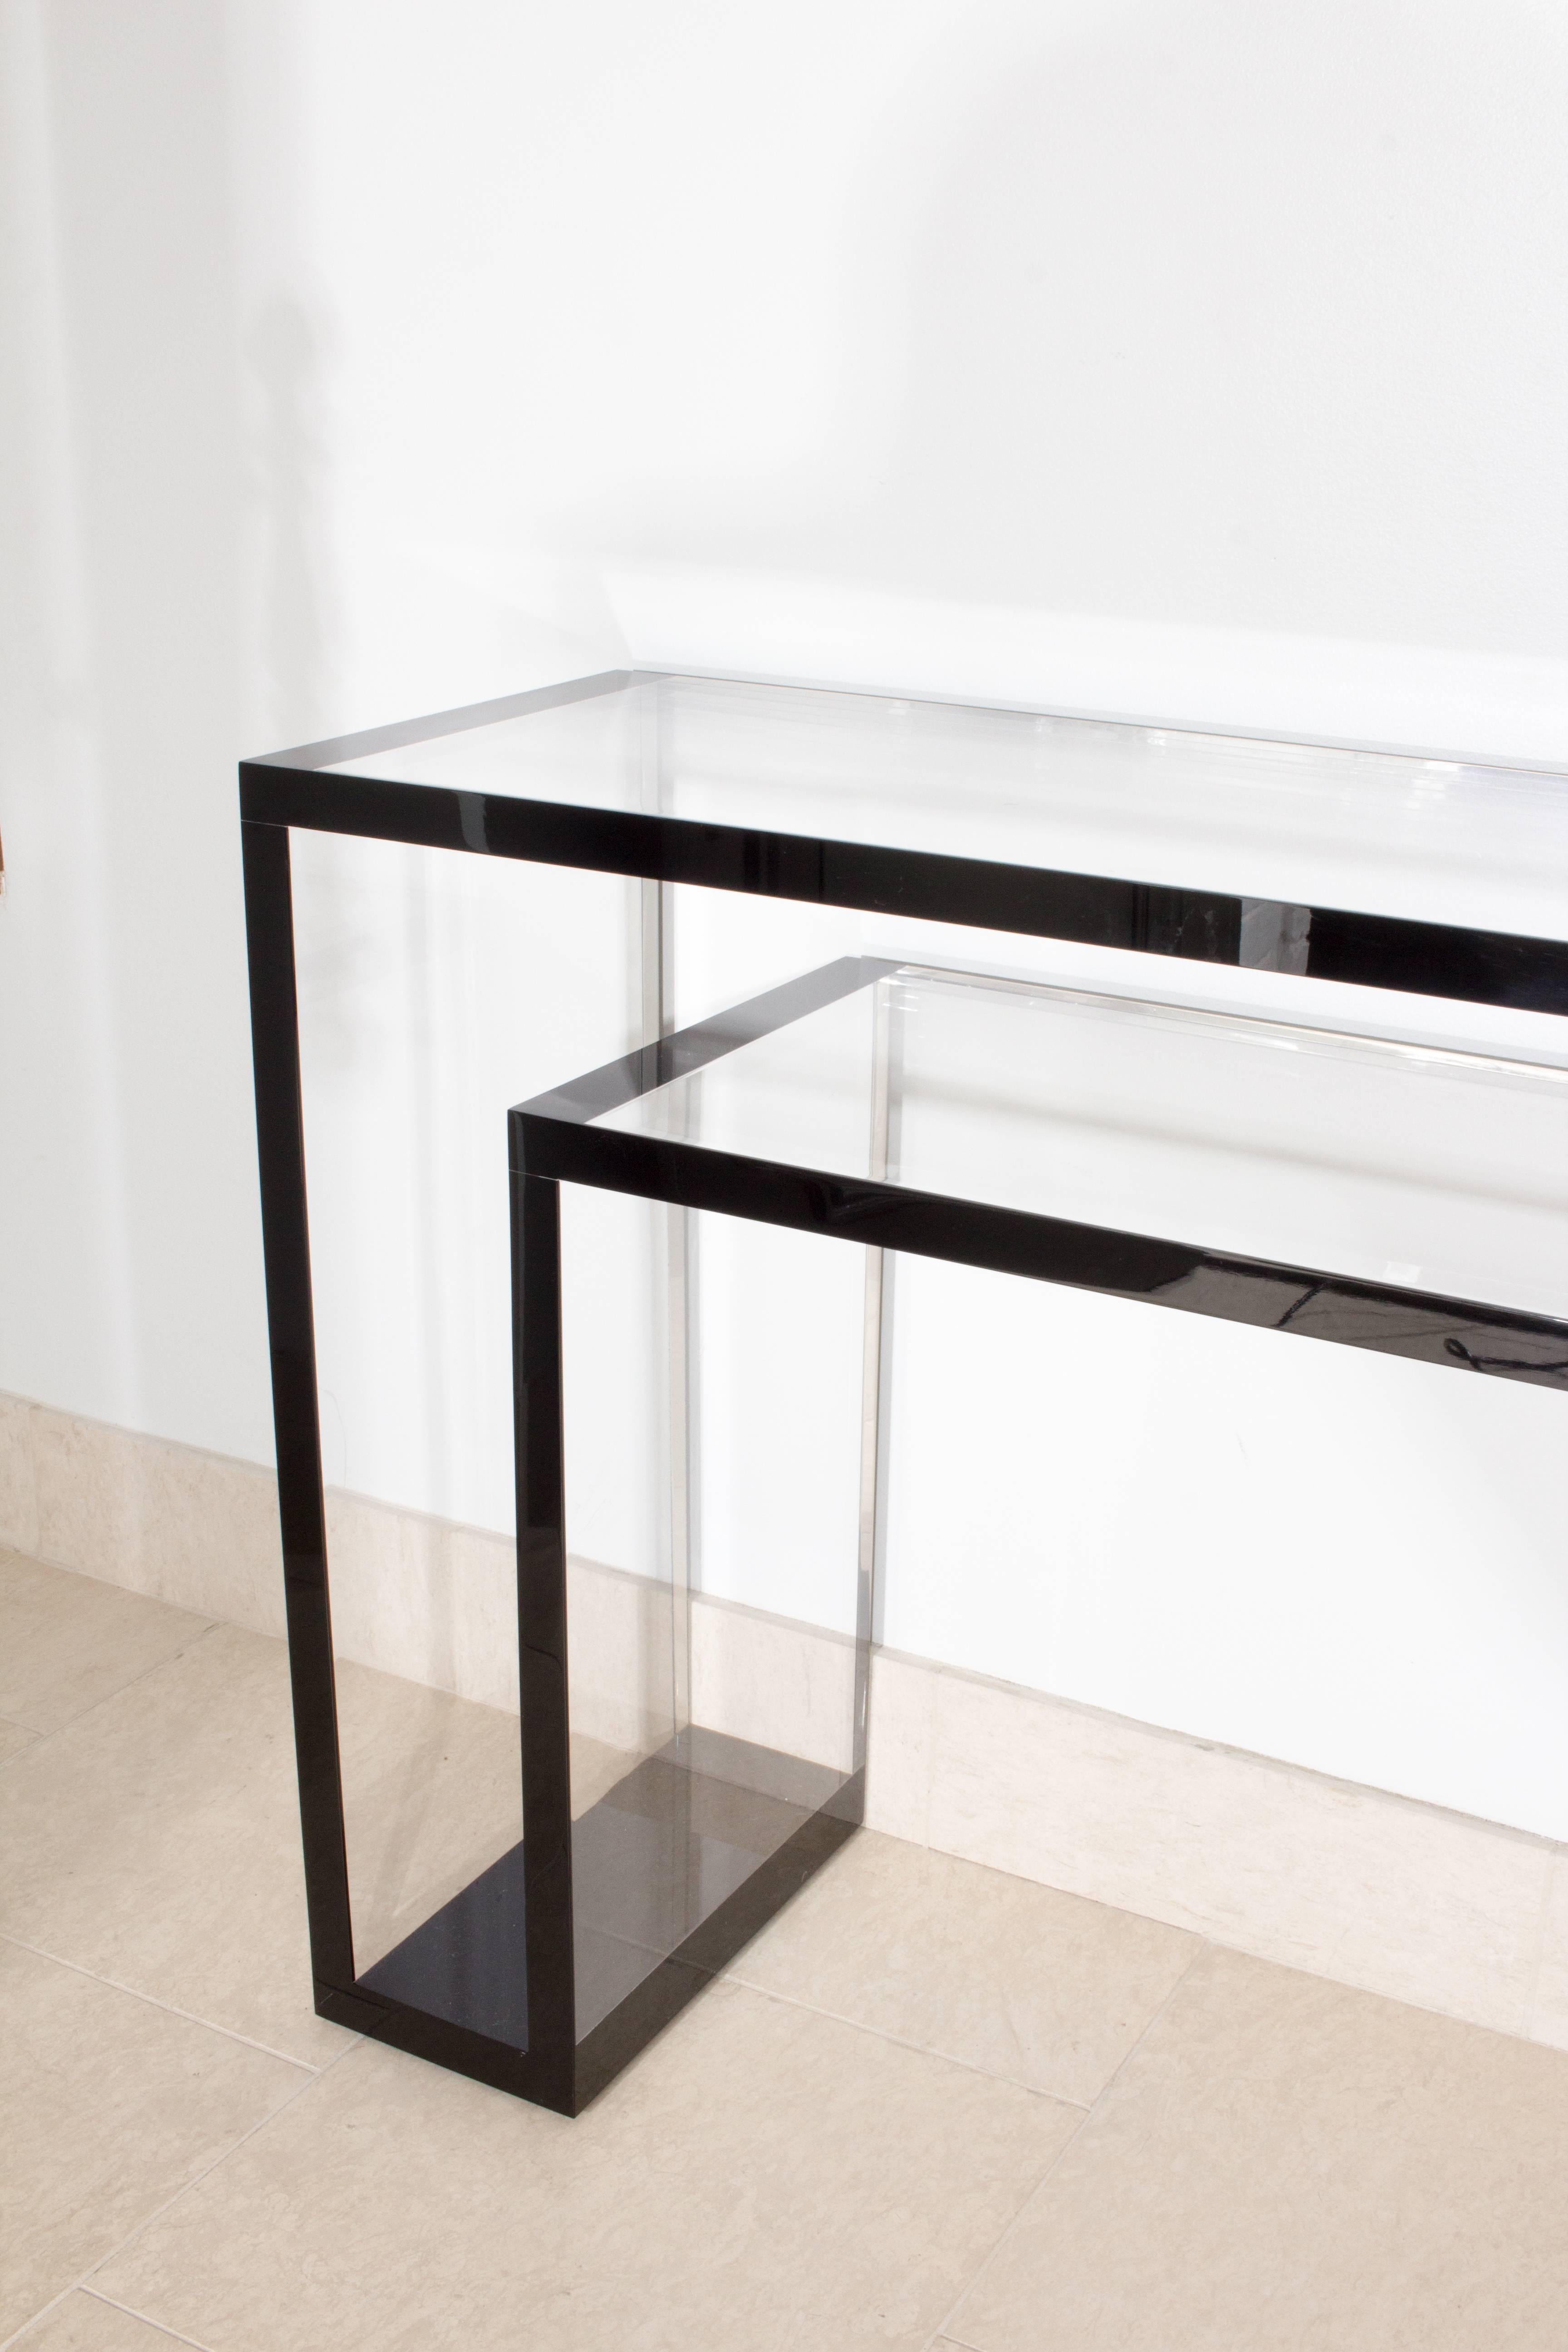 American Alexandra Von Furstenberg Stealth Console Table in Opaque Black For Sale